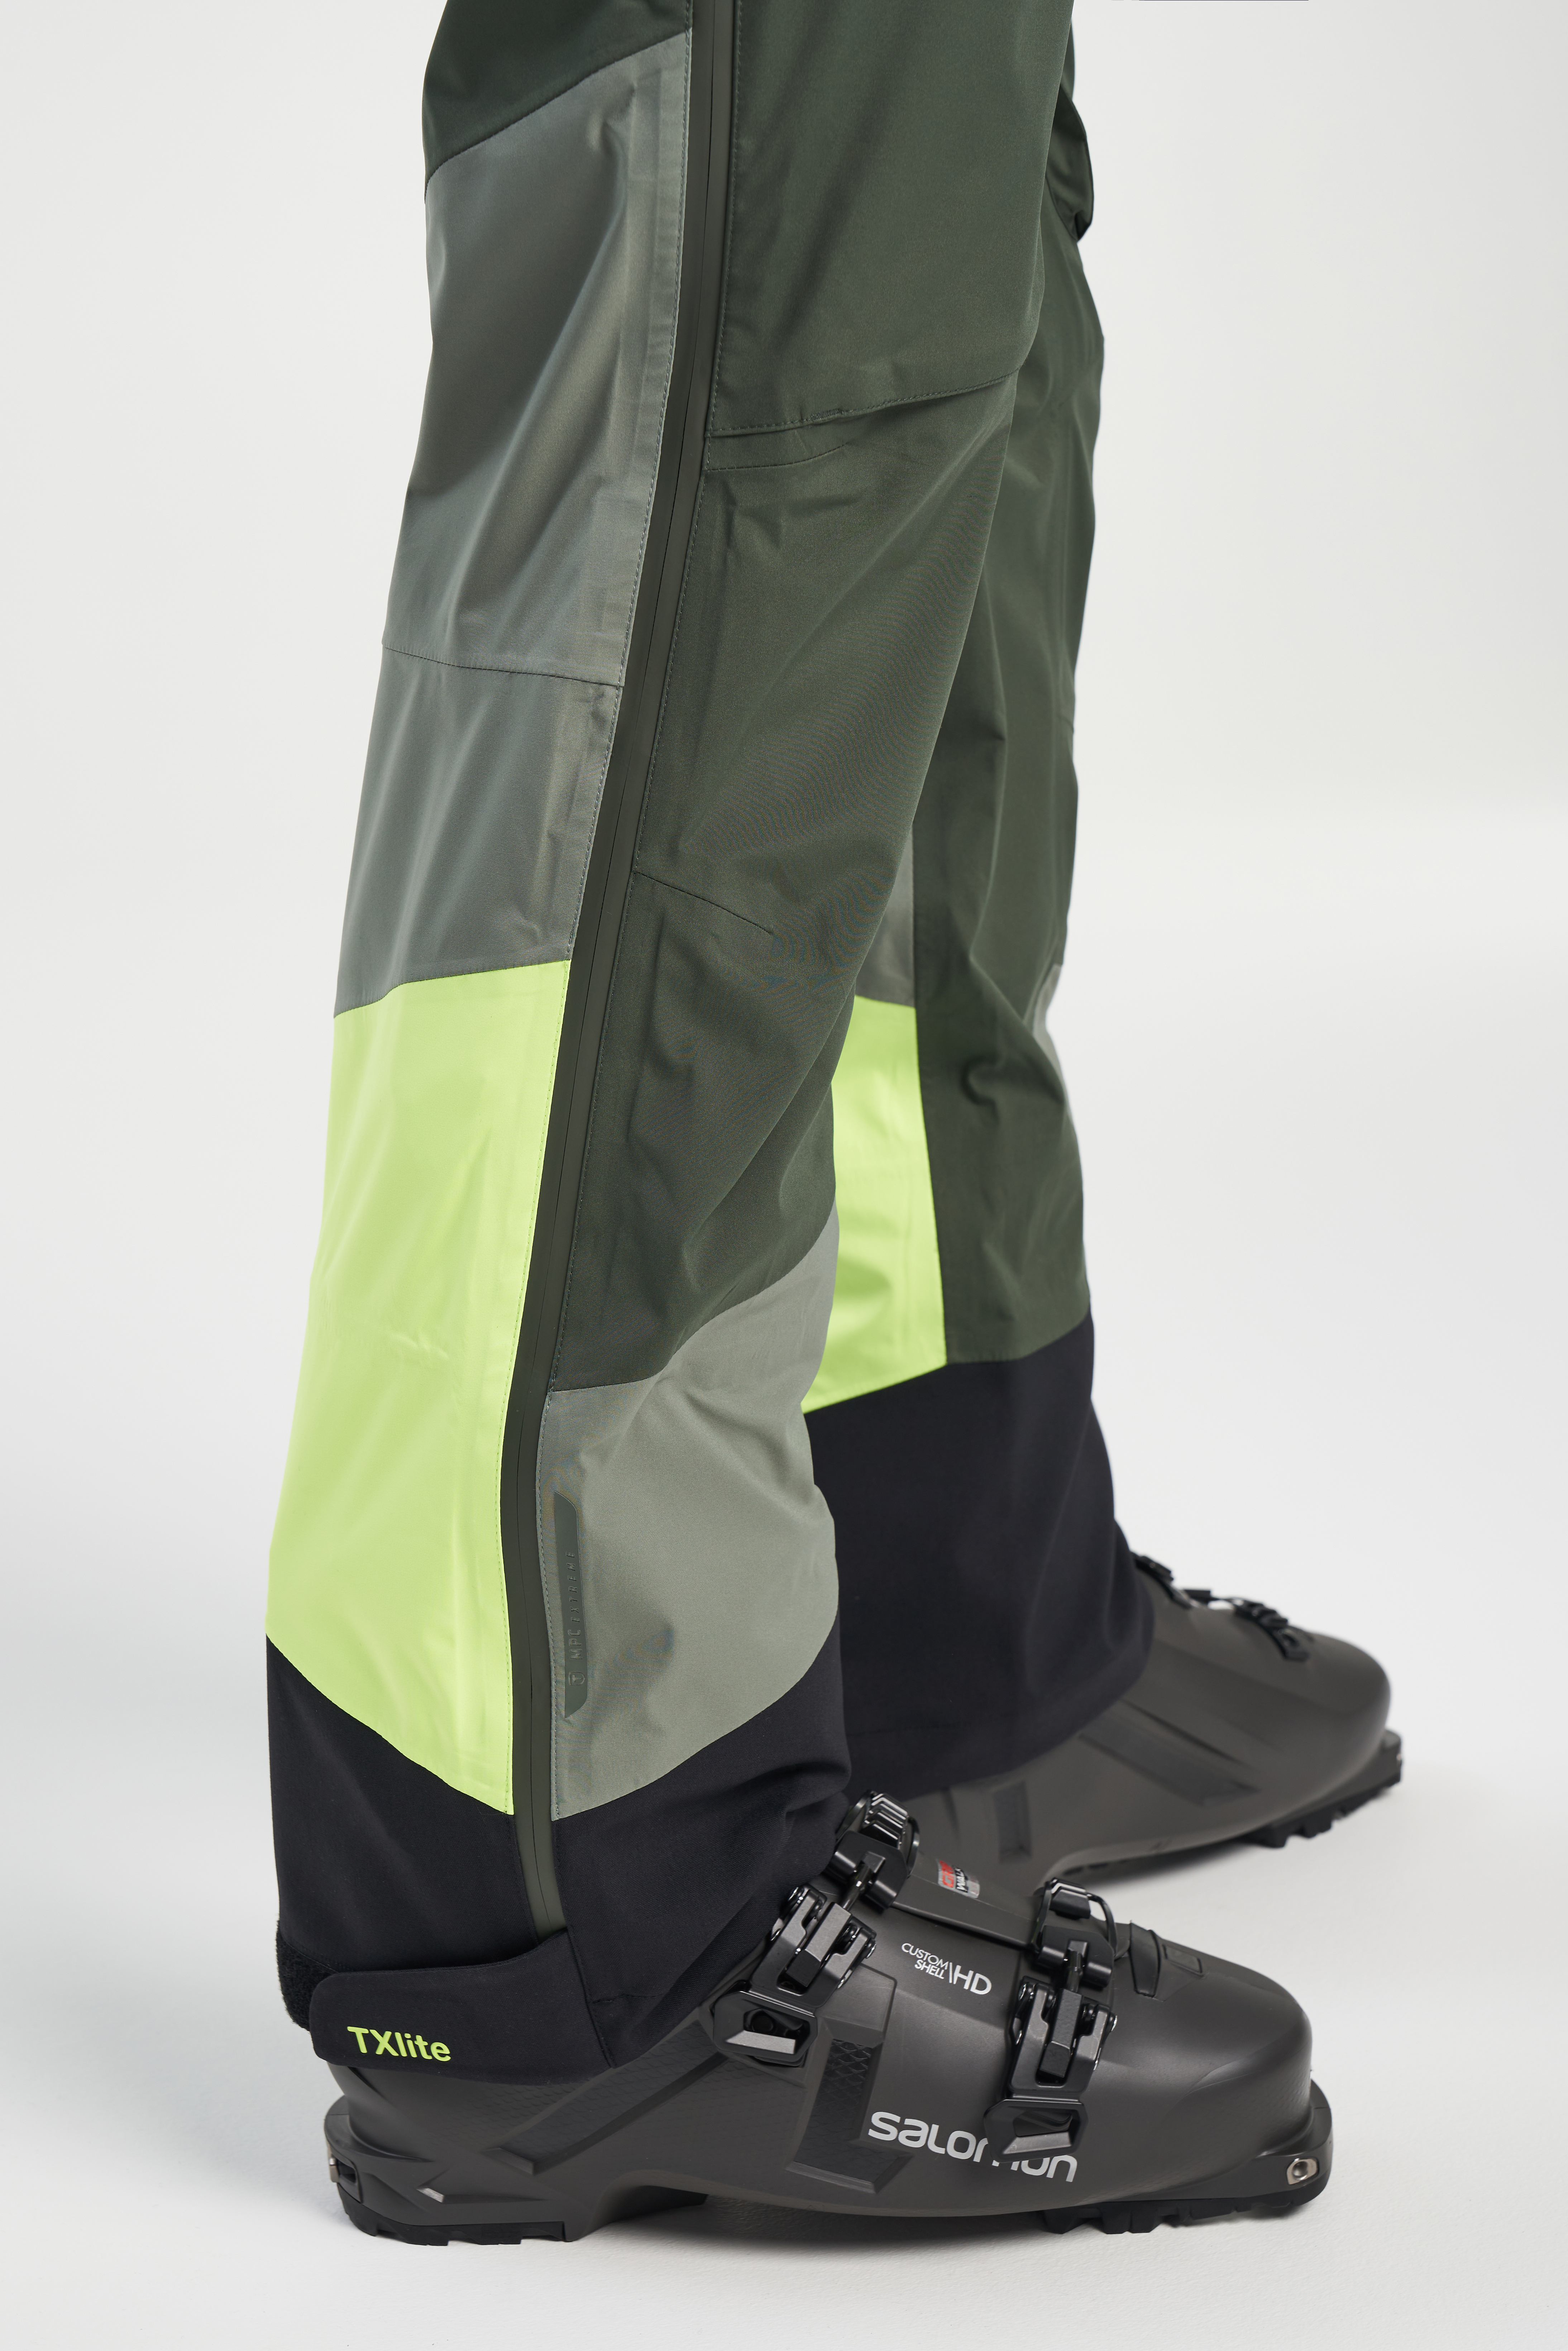 How to Choose Ski Pants for Men  GearLab